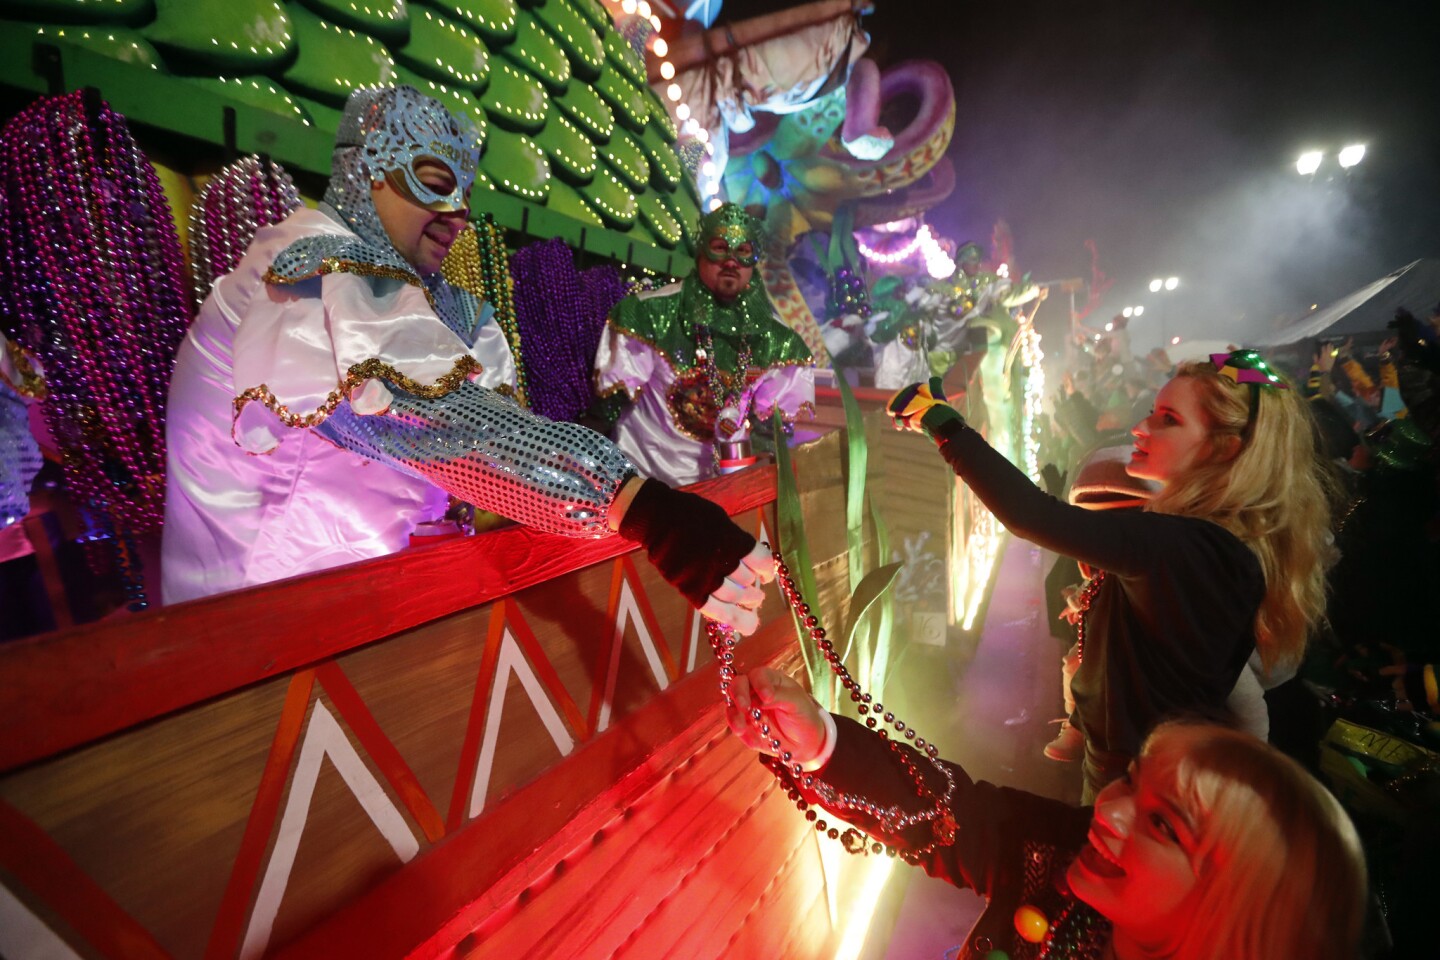 Float riders hand beads to the crowd as the Krewe of Orpheus parade rolls in New Orleans on Monday.